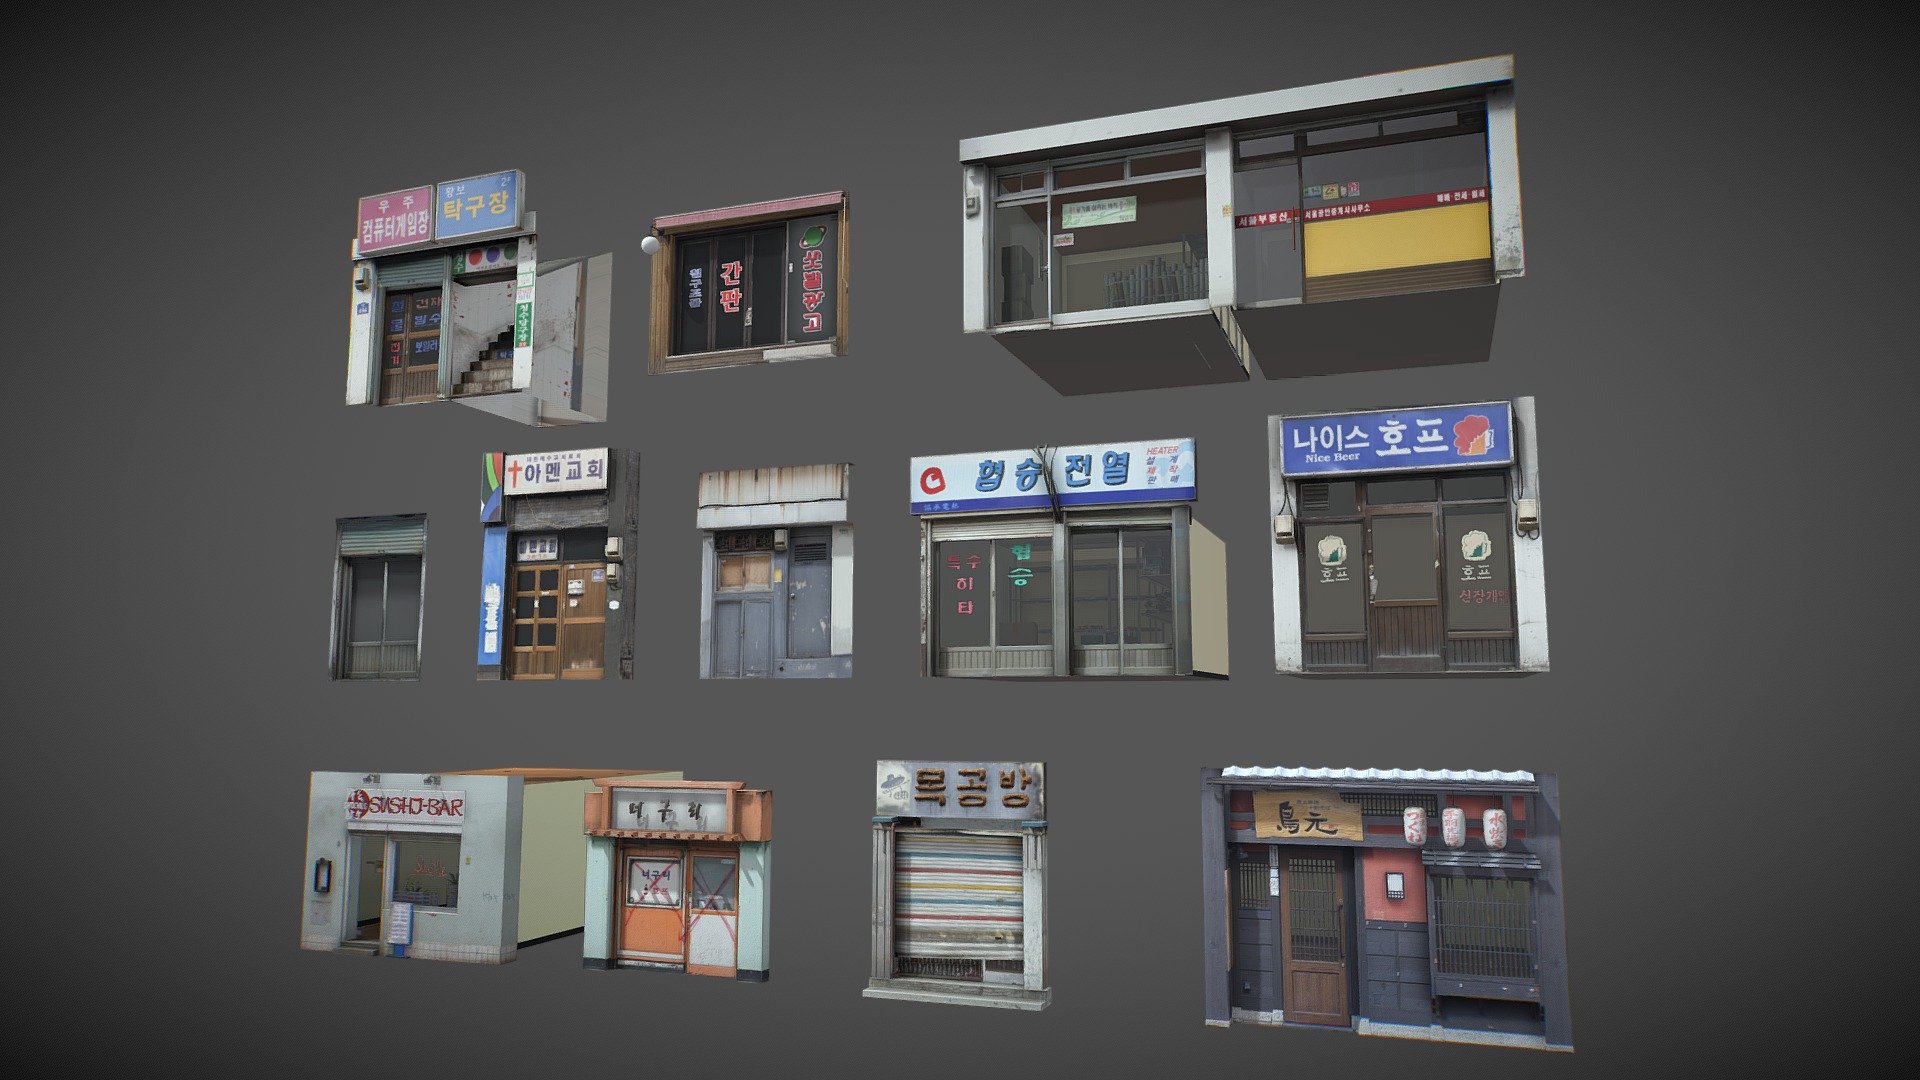 Asian Shop Pack

you can buy asian Shops Pack by single element on my profile.

textured from a real life image, the glass and emission material are separated 3d model